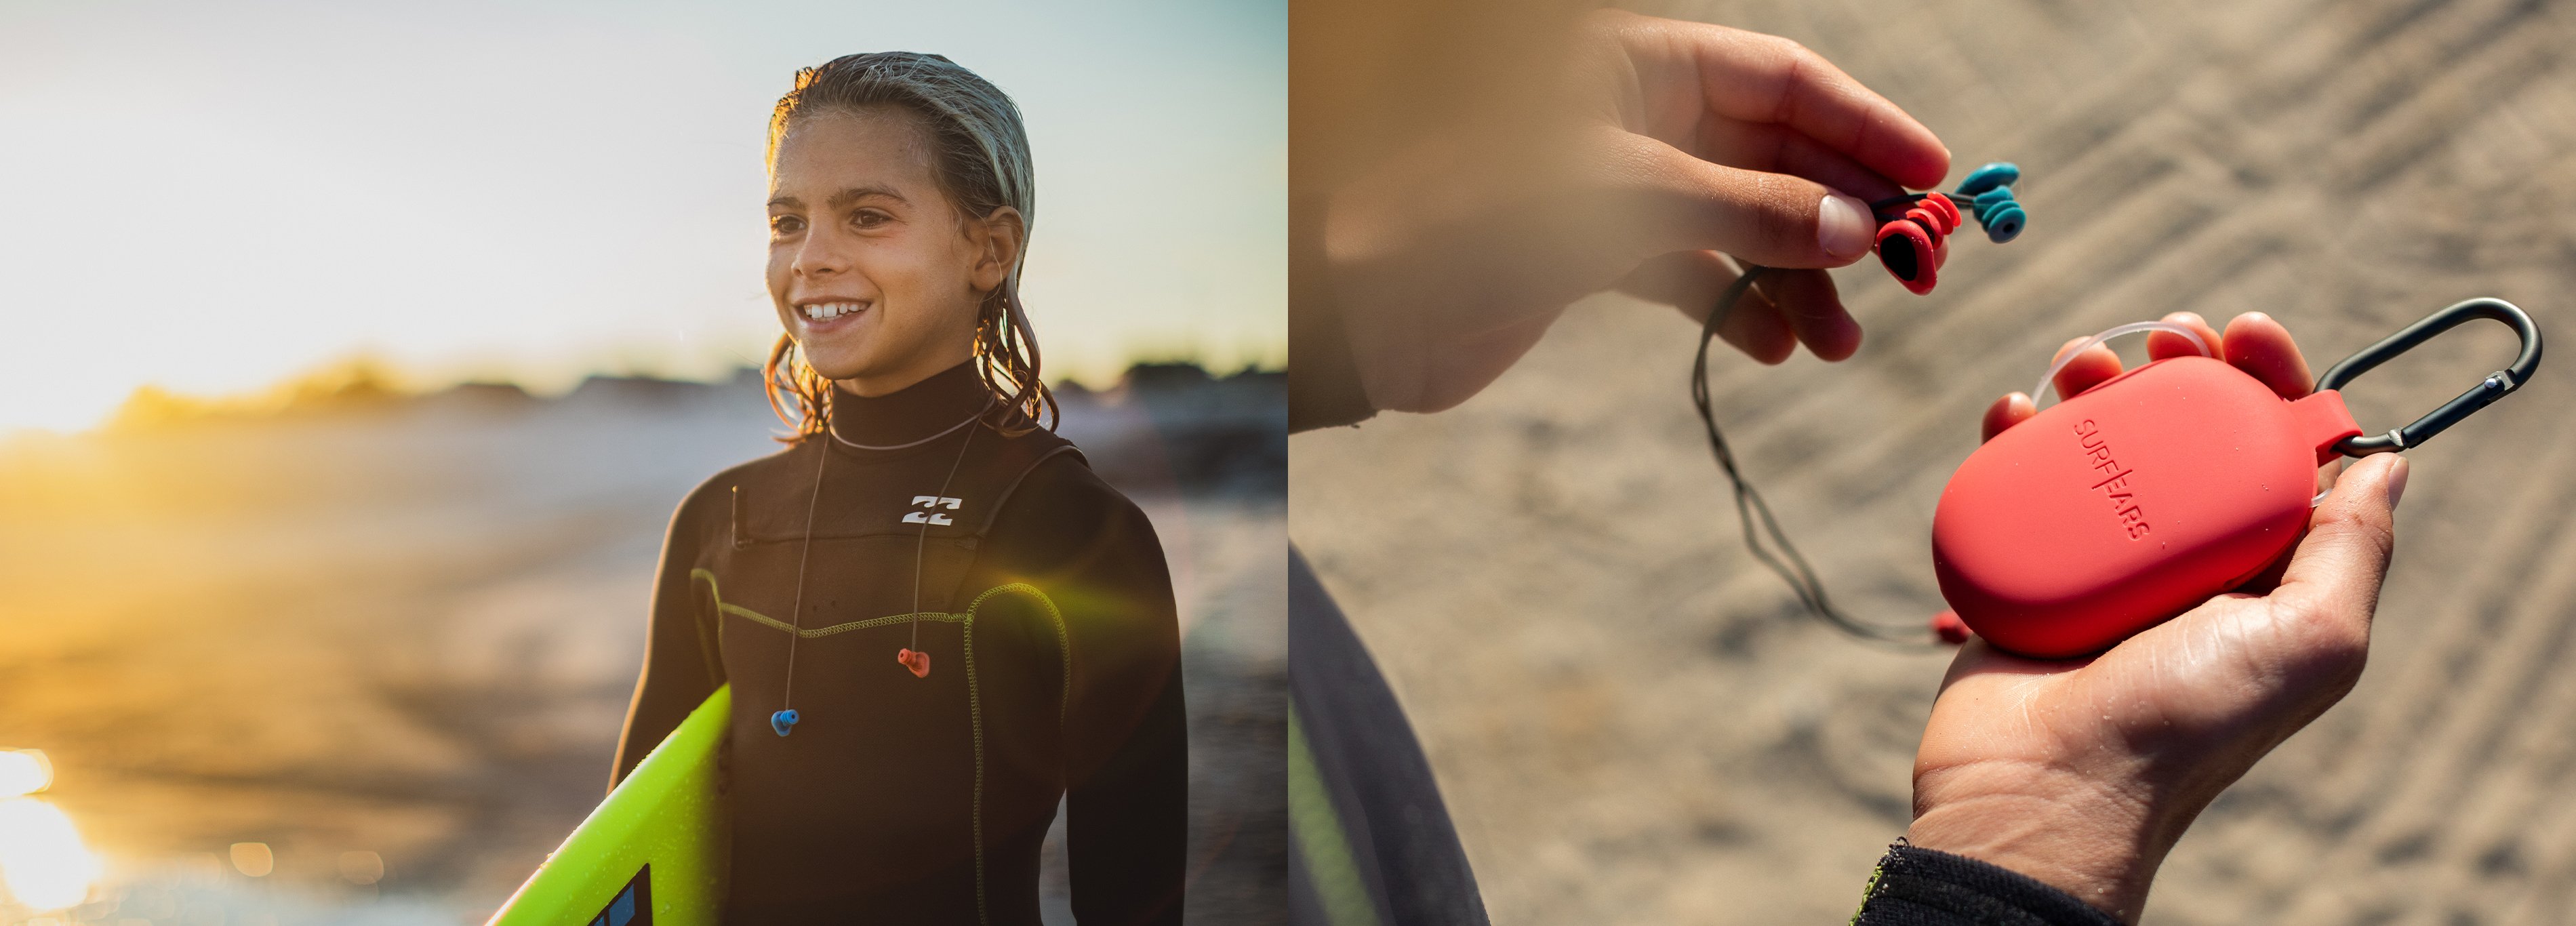 Protect Your Ears When Surfing This Winter.